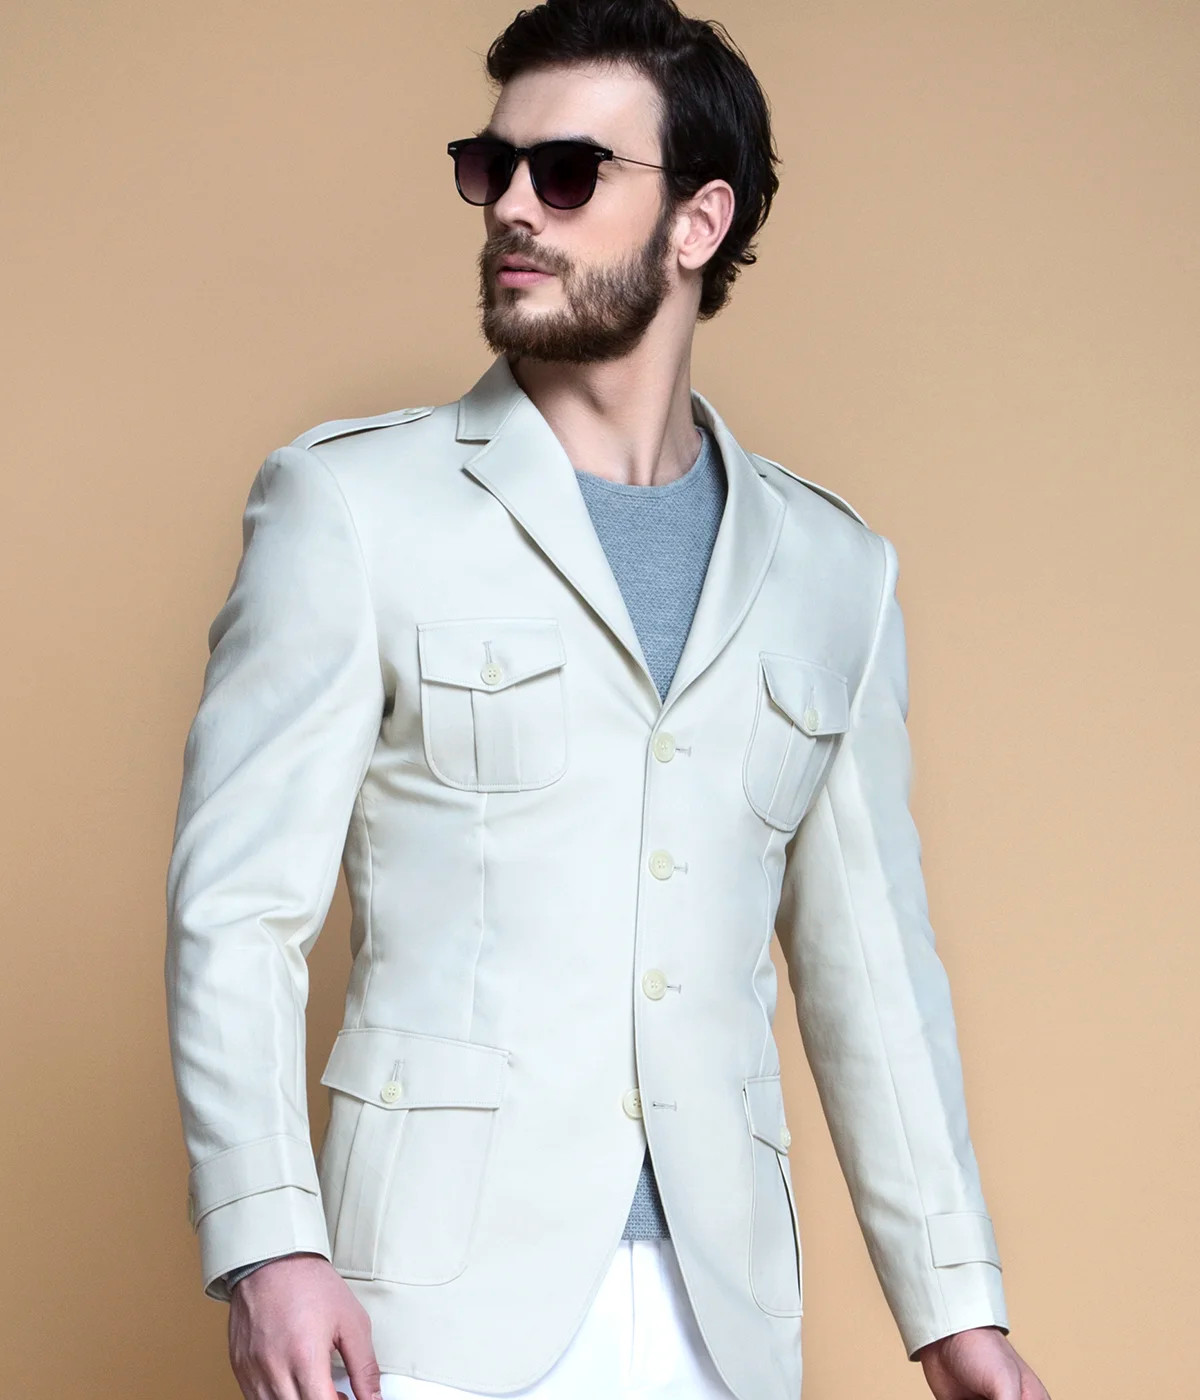 Safari Suits - Sustainable Custom Menswear by A.i.